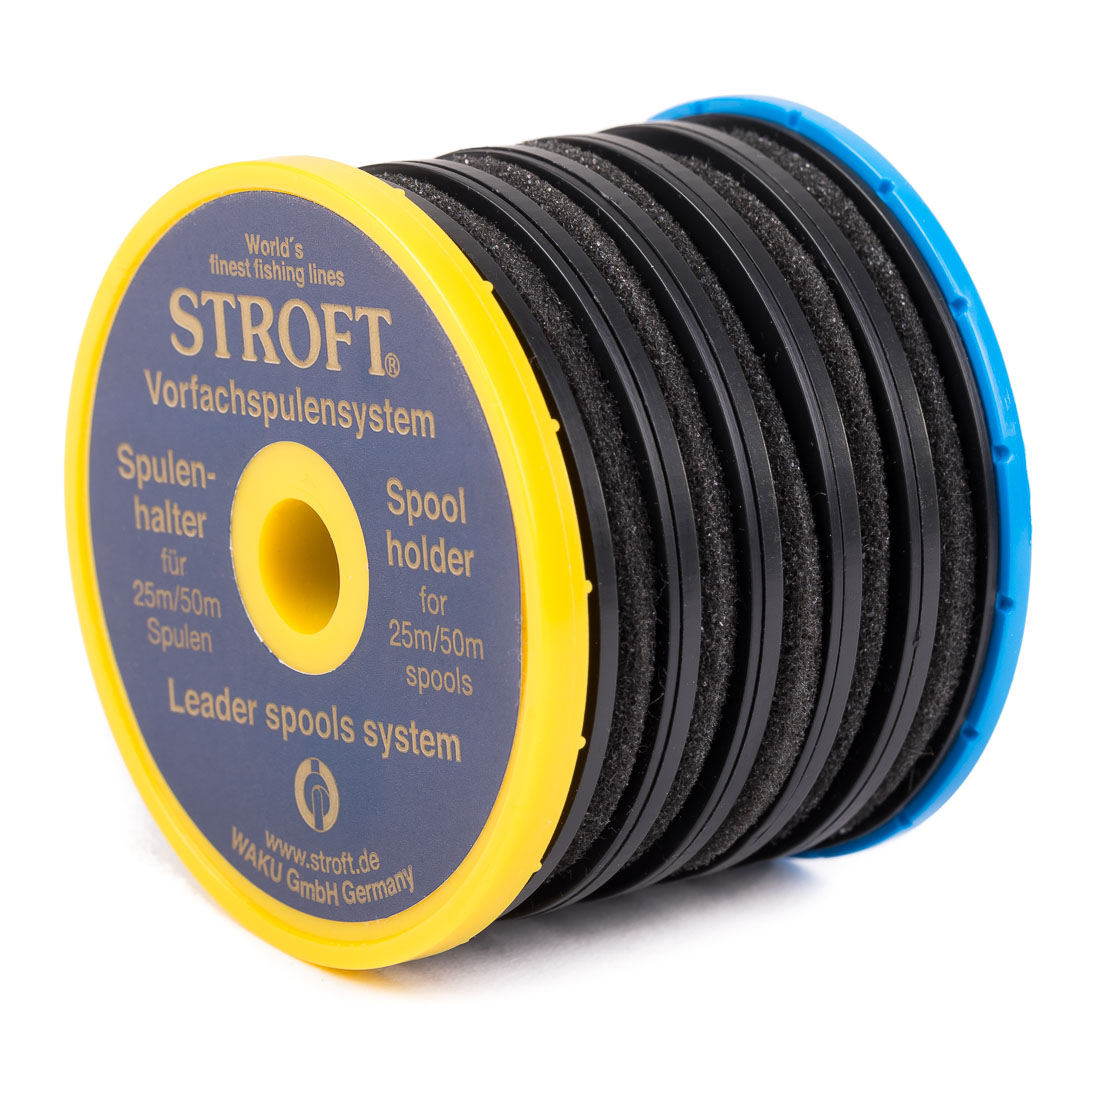 Stroft Leader Spool Holder for 5 Spools, Line Accessories